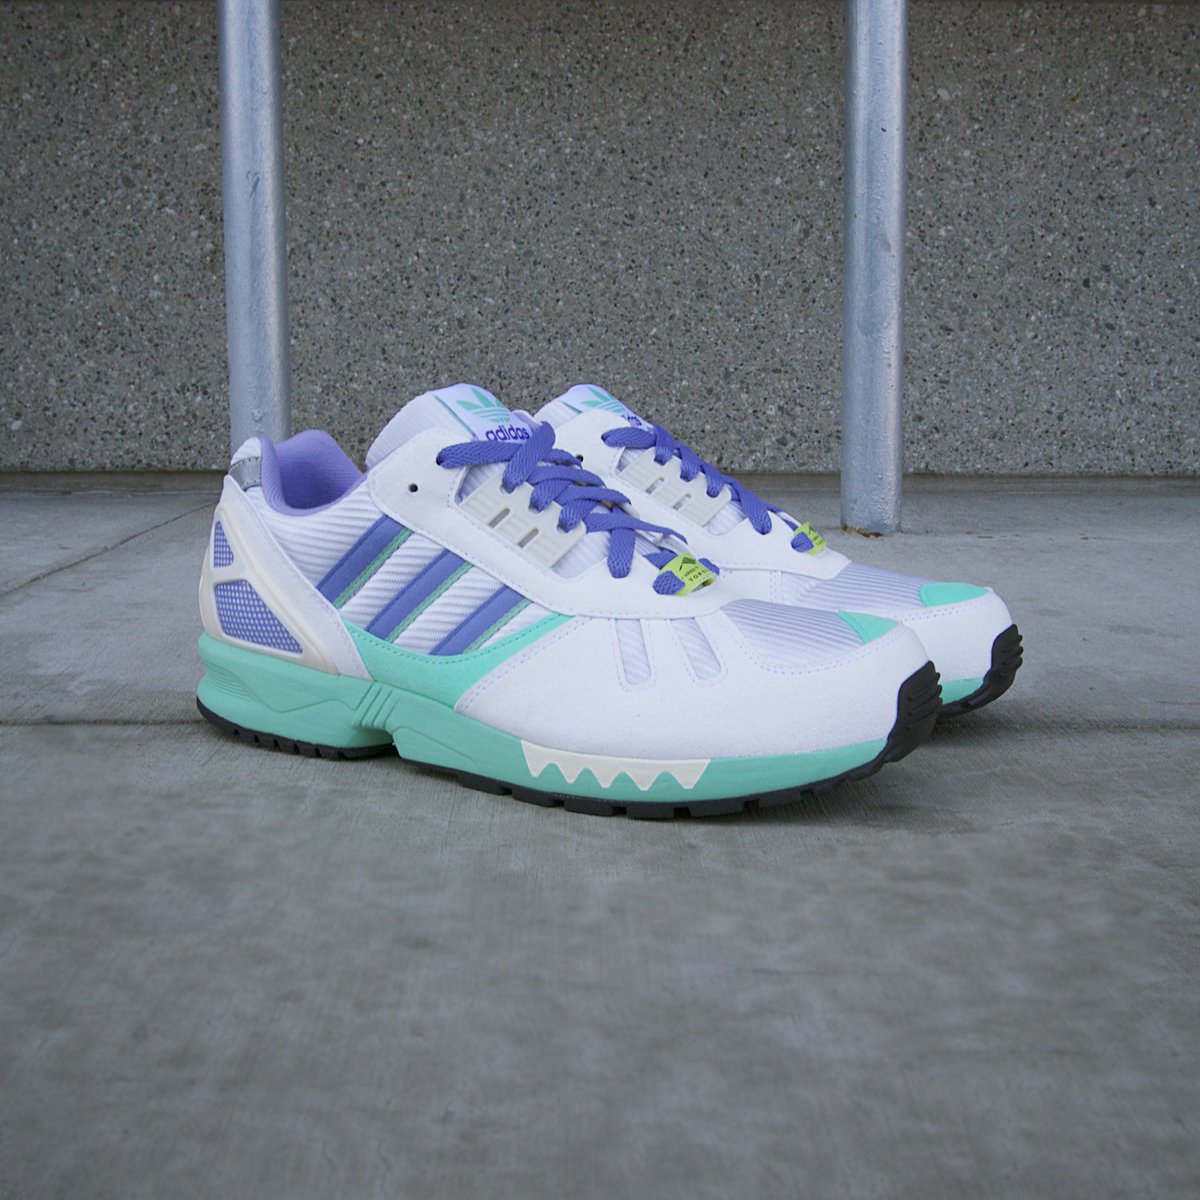 Adidas '30 Years of Torsion' OG ZX 7000 